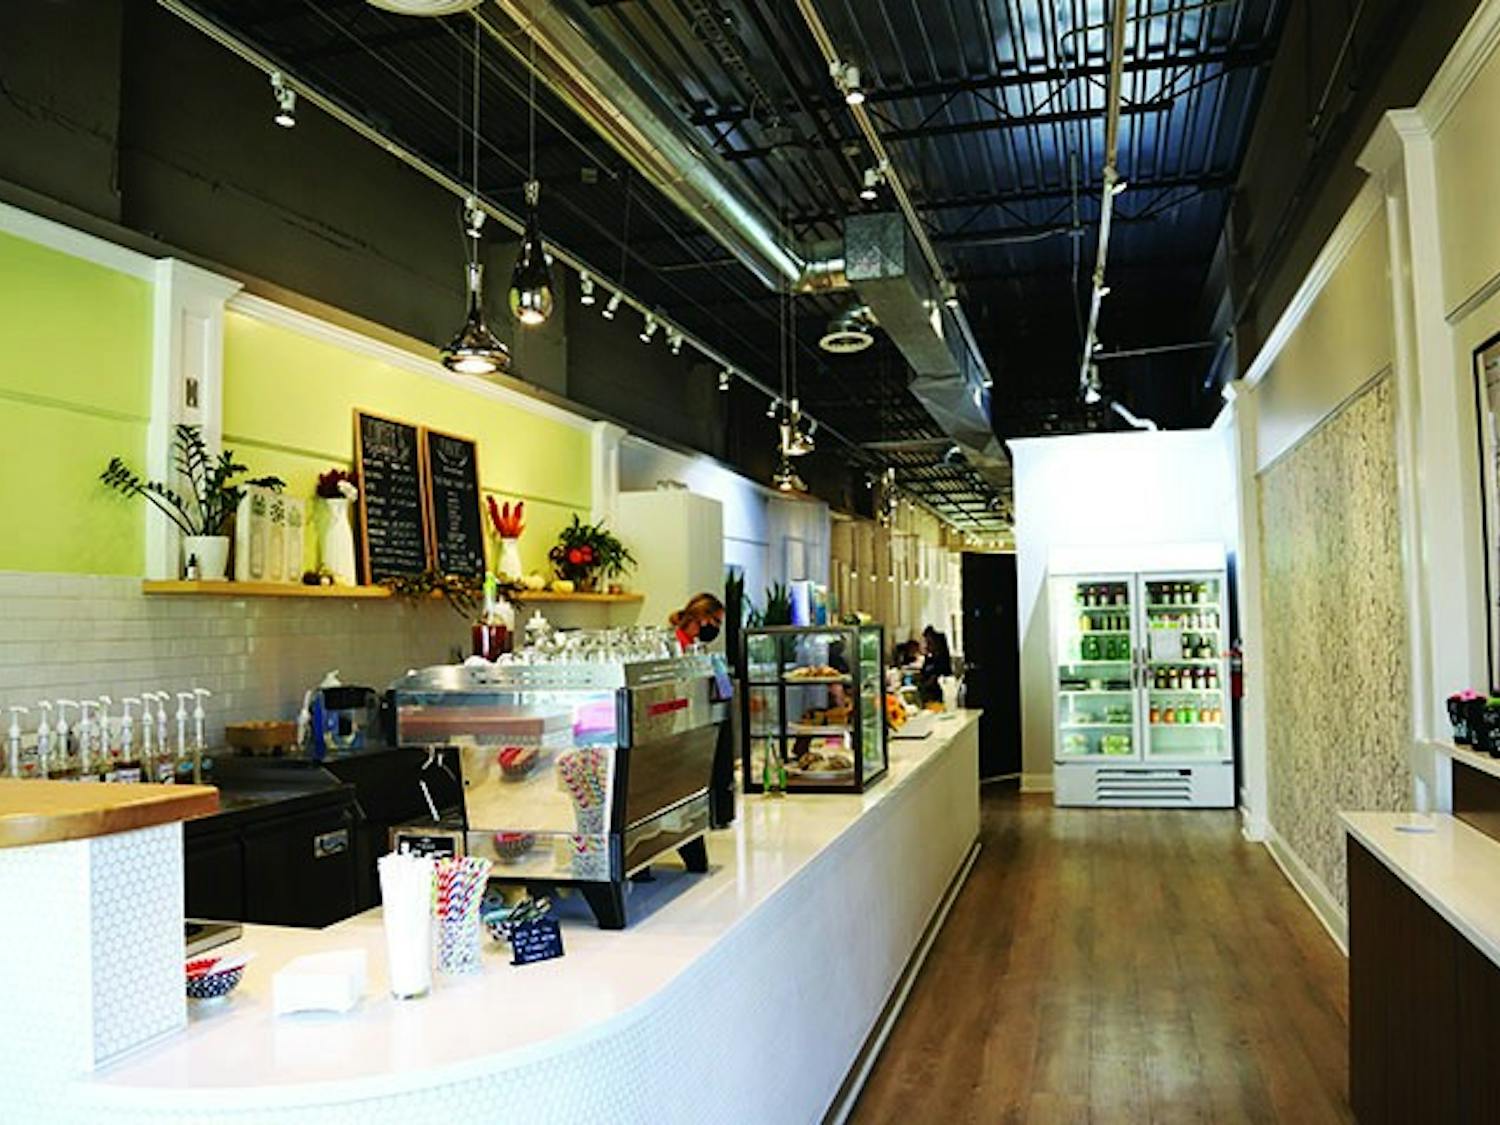 Blum Coffee's bar is brightly lit and located in the front of the store. The bar includes two large chalkboard menus and is lined with coffee machines, syrups and a case of baked goods.